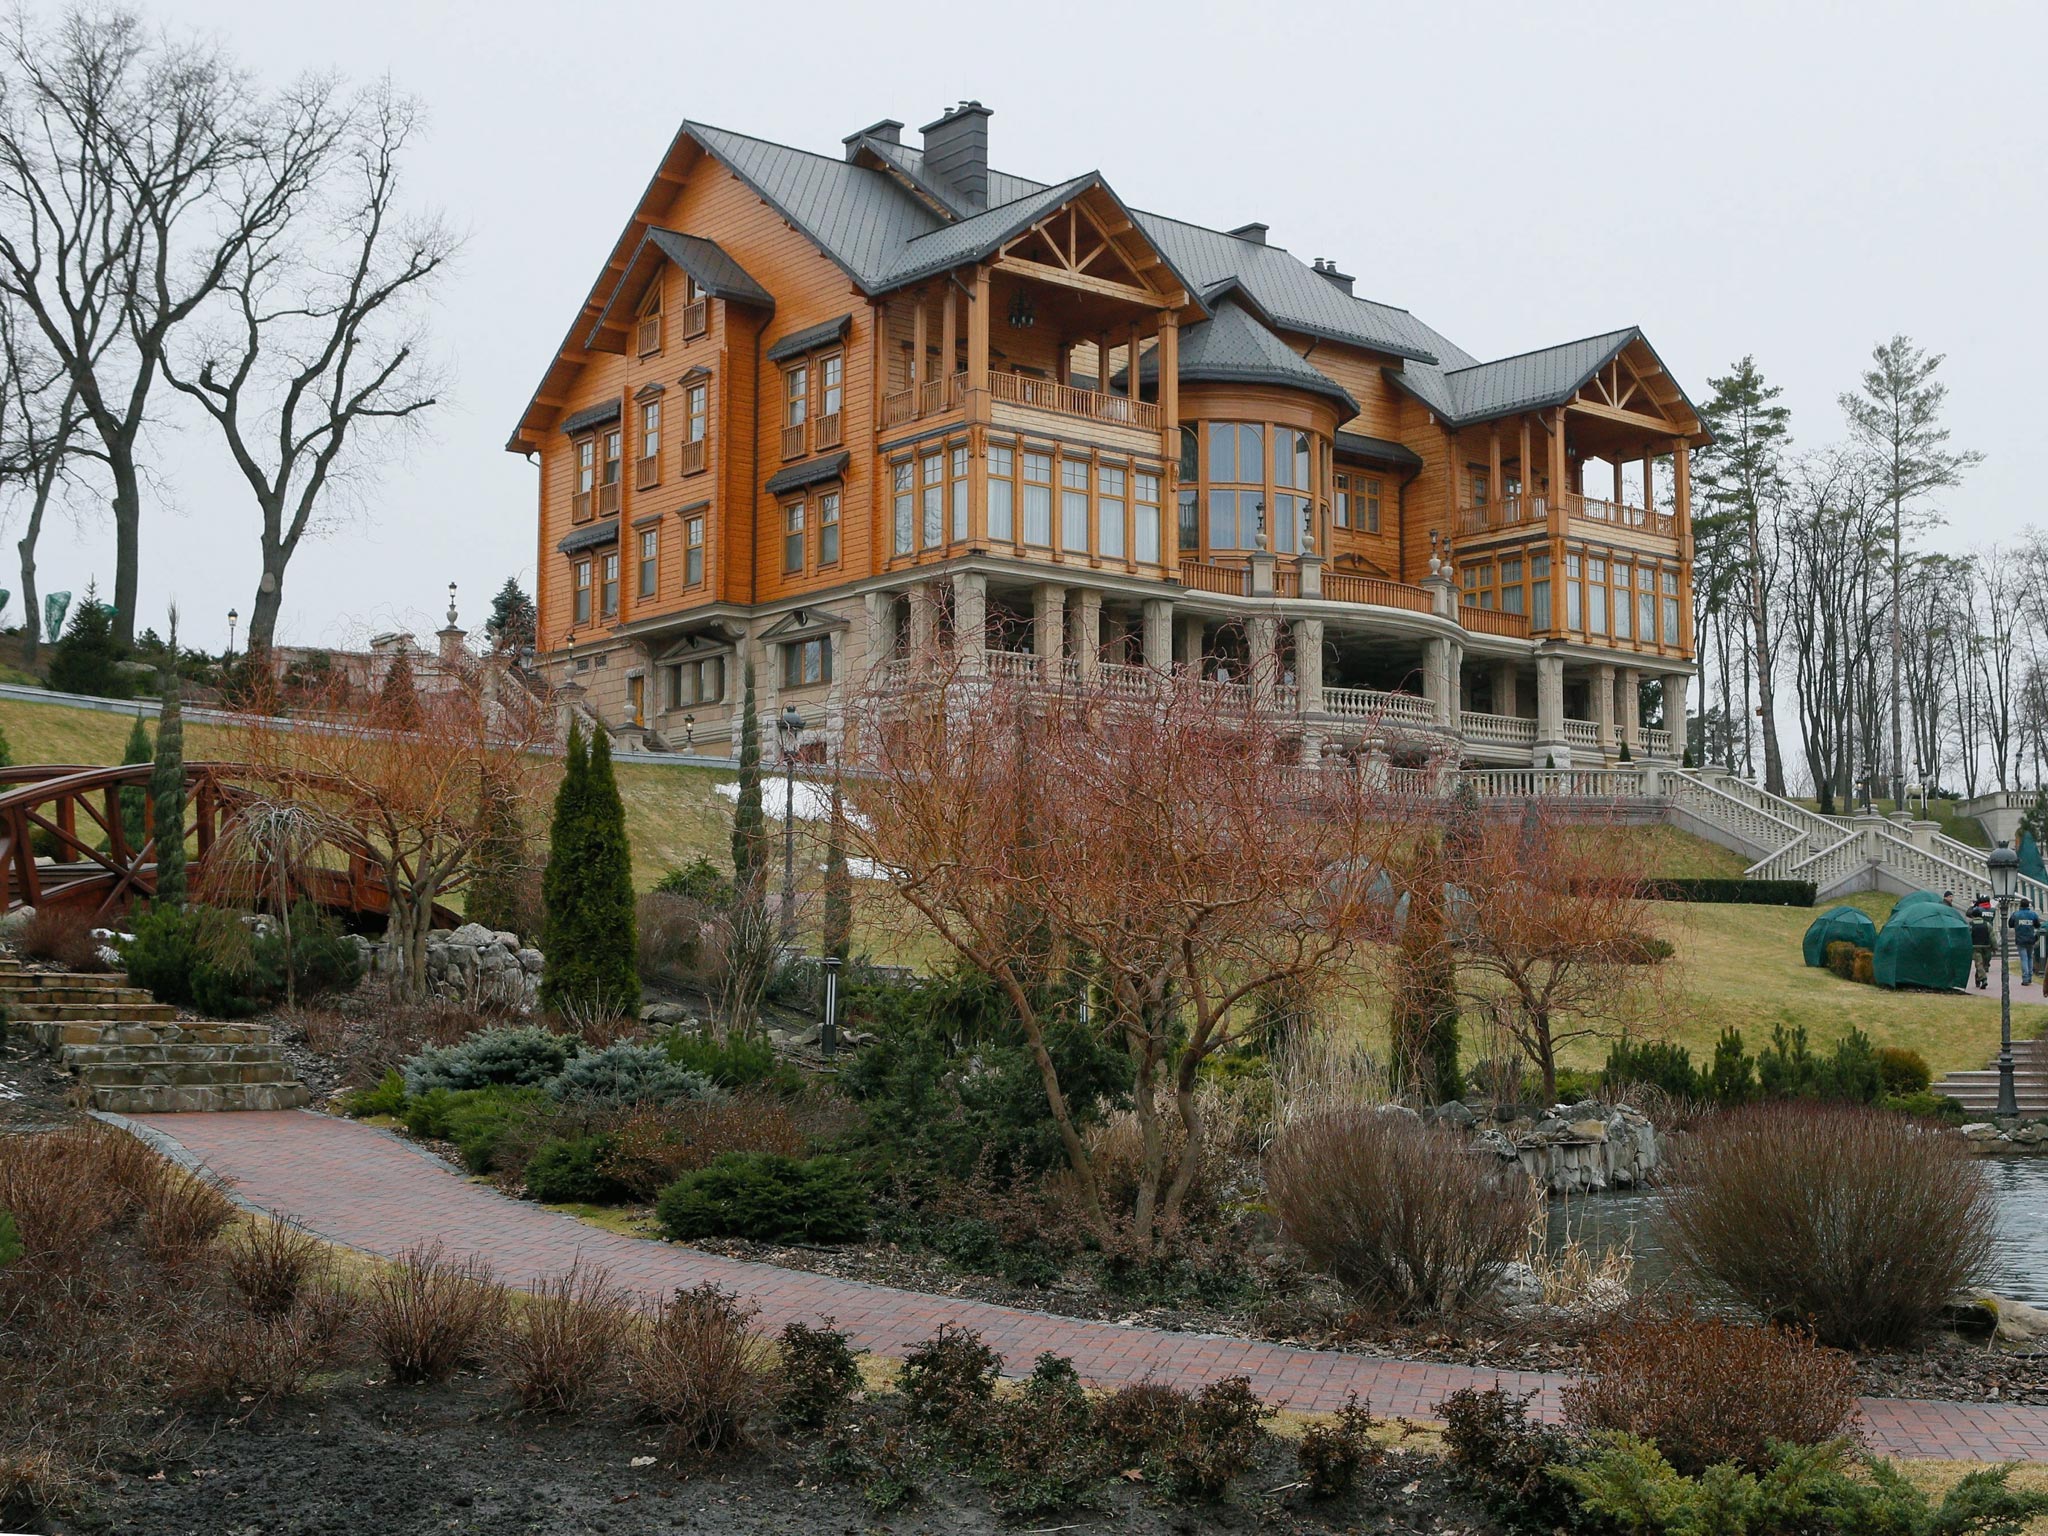 An exterior view of the main building in the residence of Ukrainian President Viktor Yanukovych